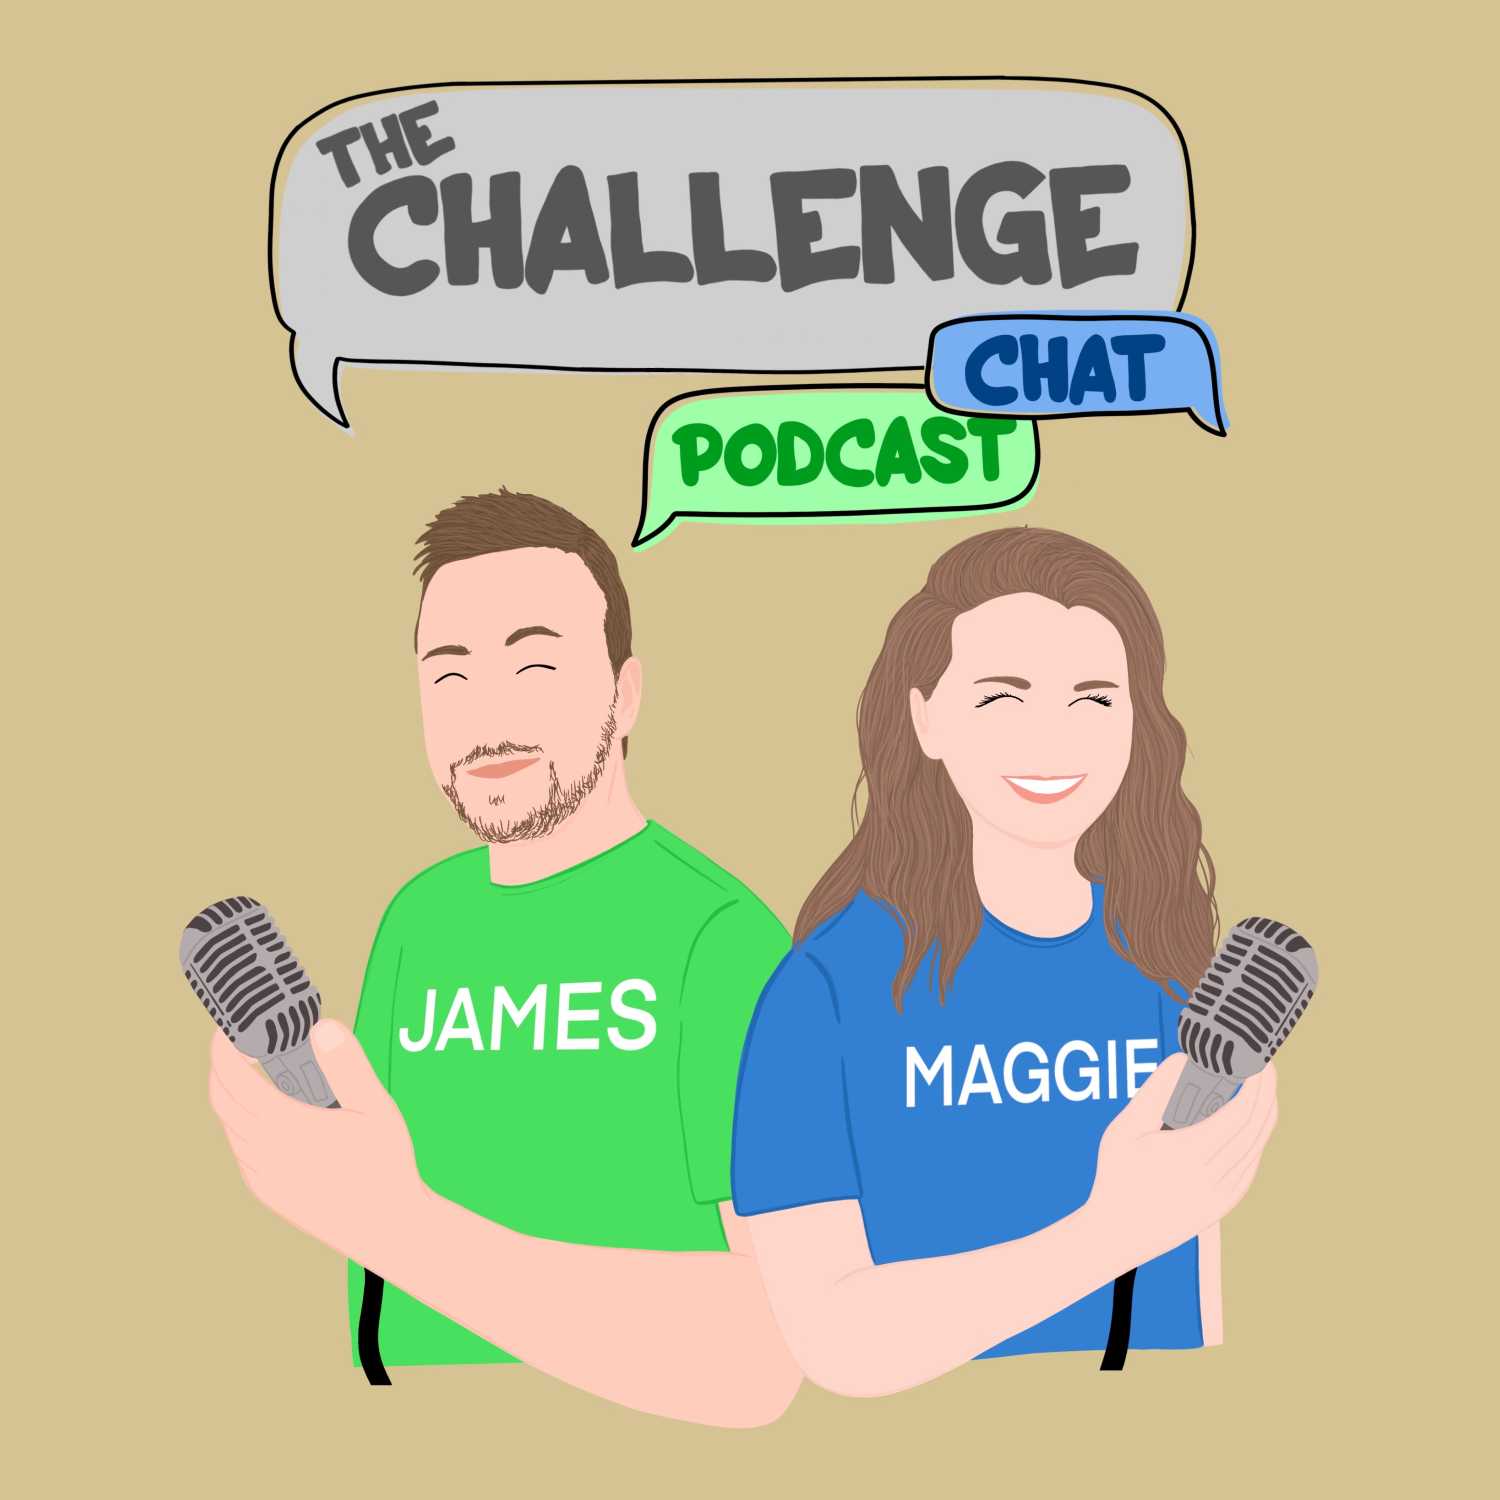 The Challenge Chat Podcast